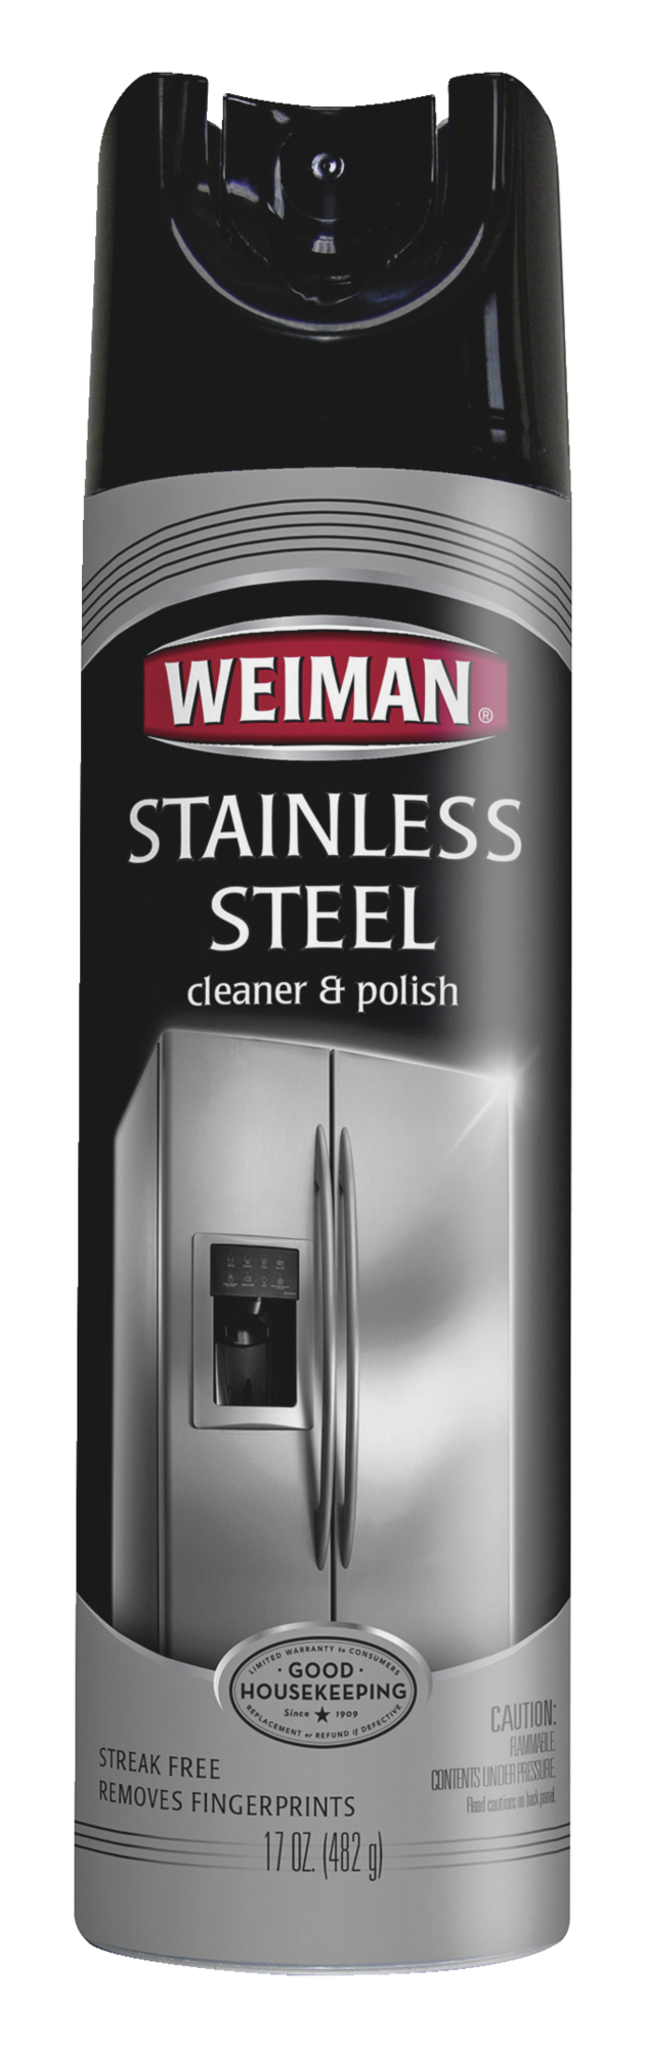  Weiman Stainless Steel Cleaner and Polish - 17 Ounce